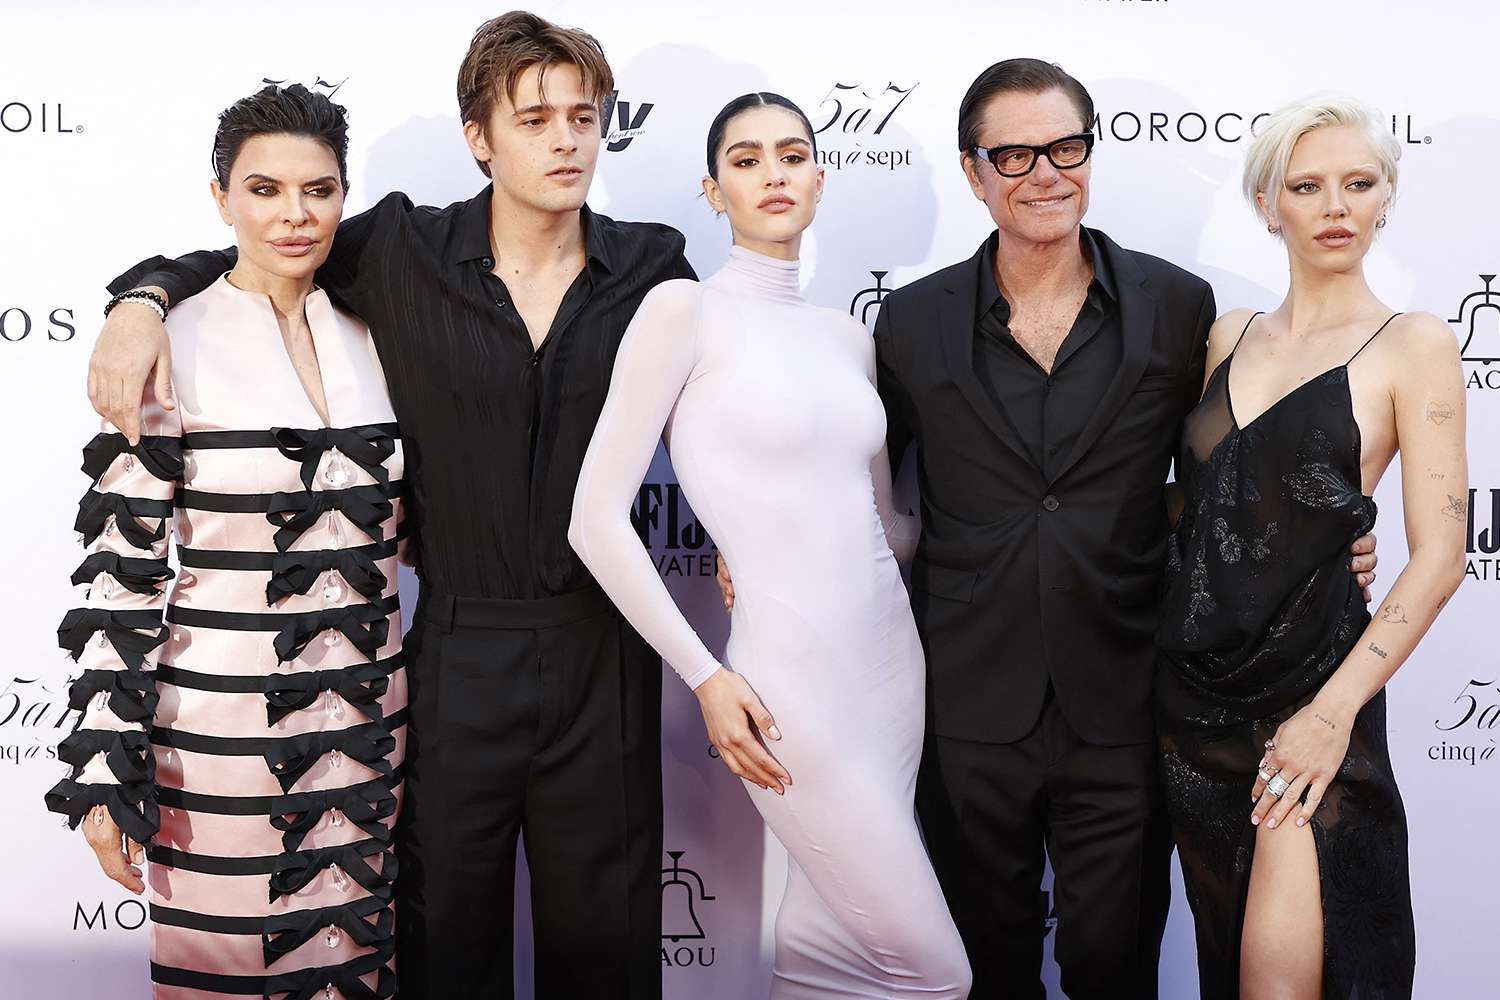 Lisa Rinna, Henry Eikenberry, Amelia Gray, Harry Hamlin and Delilah Belle Daily Front Row fashion awards beverly hills 04 28 24